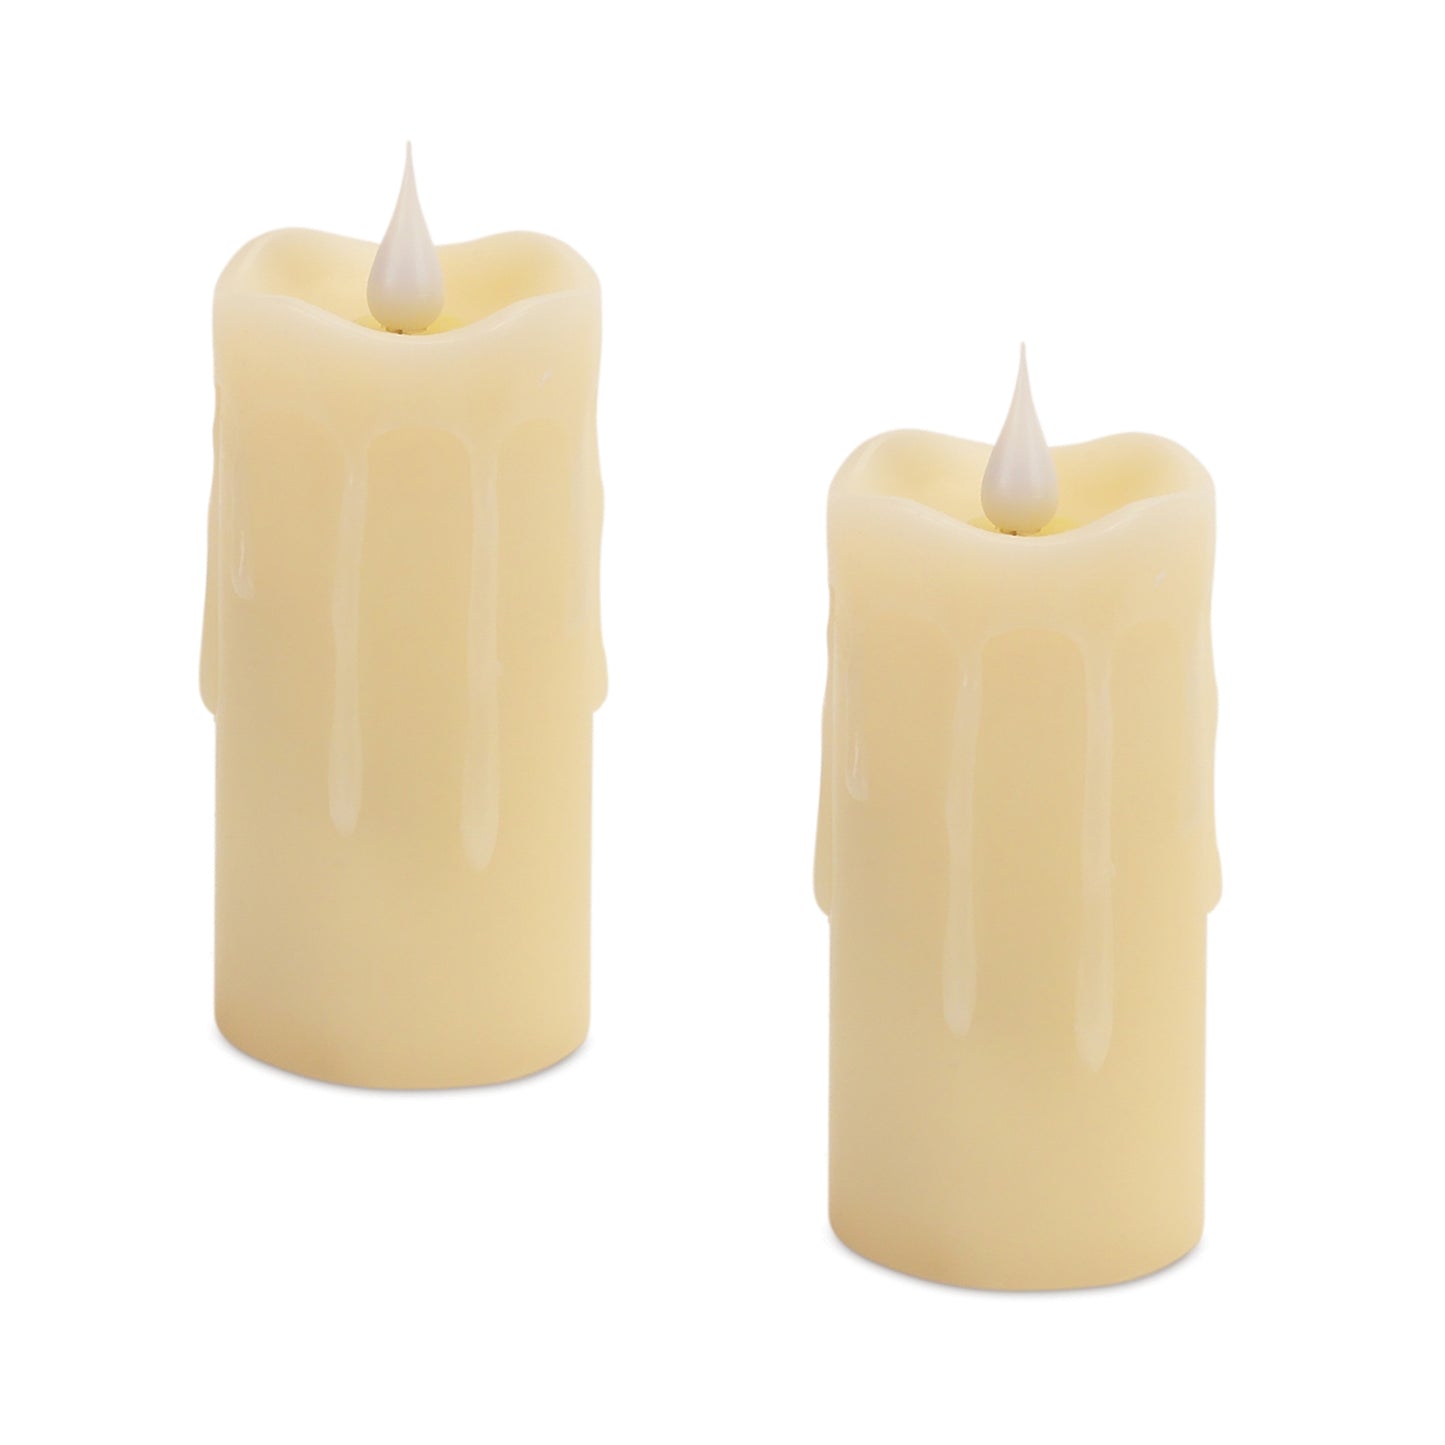 Simplux LED Votive Candle with Moving Flame and Remote (Set of 2)